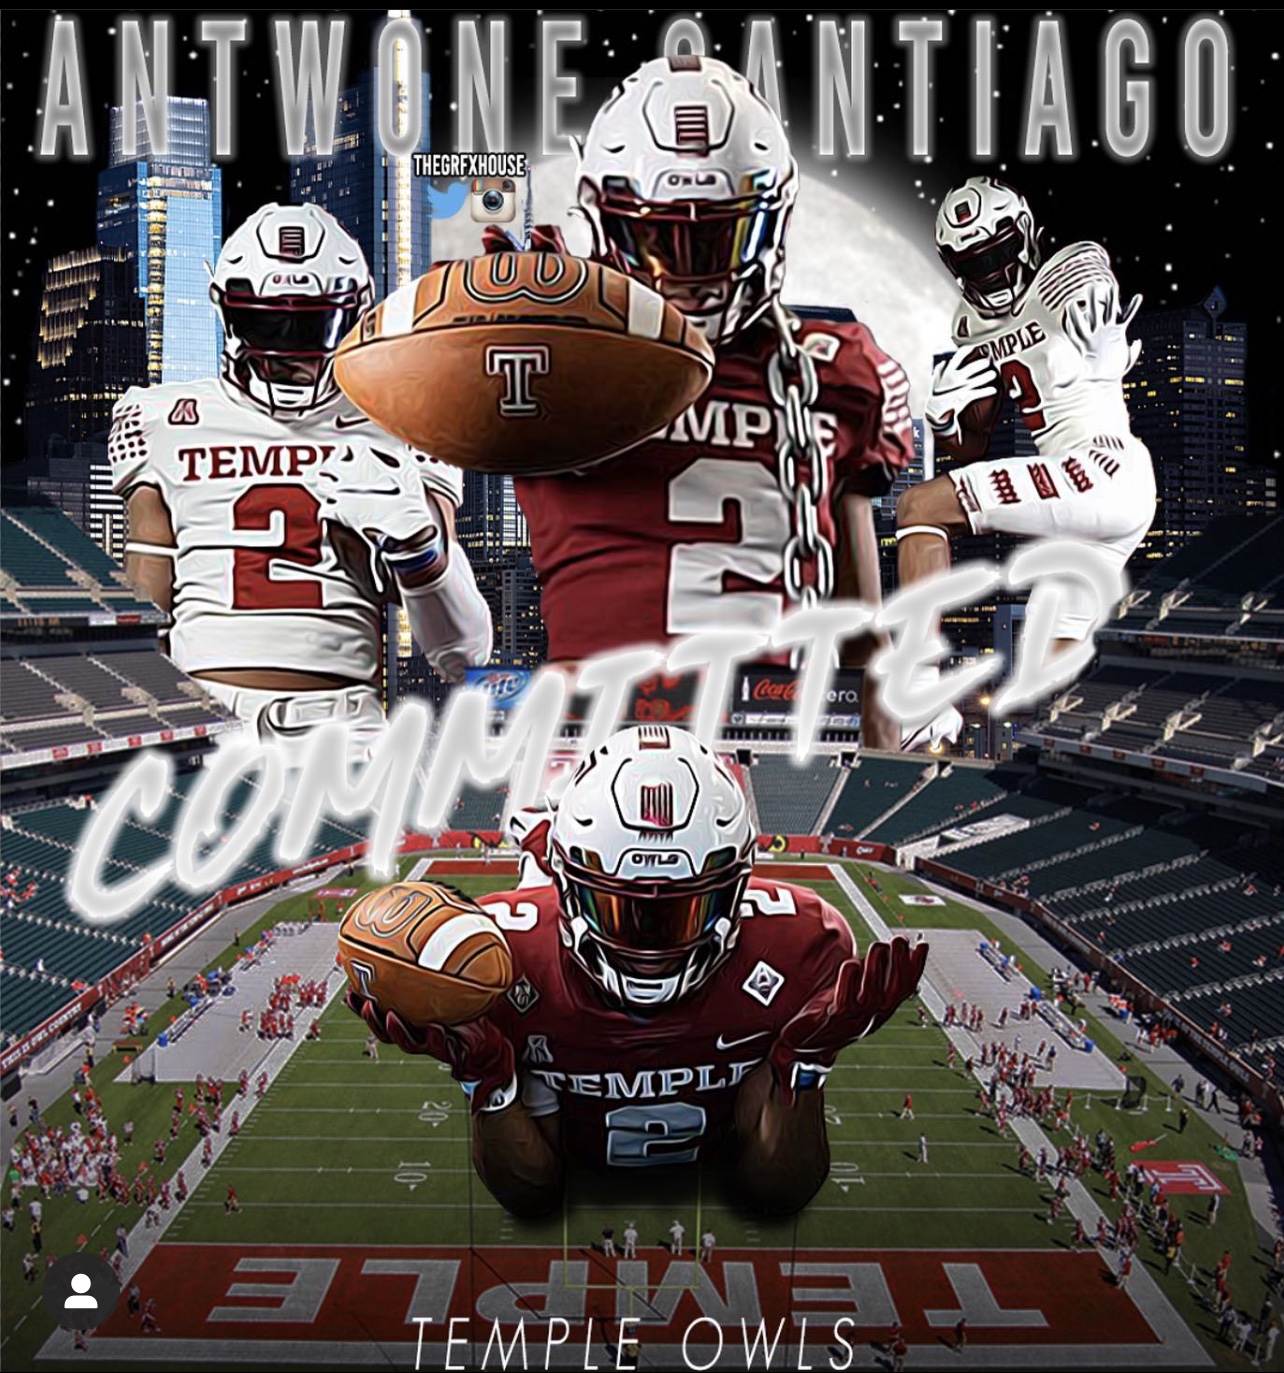 Antwone Santiago Commits to Temple on Football Scholarship